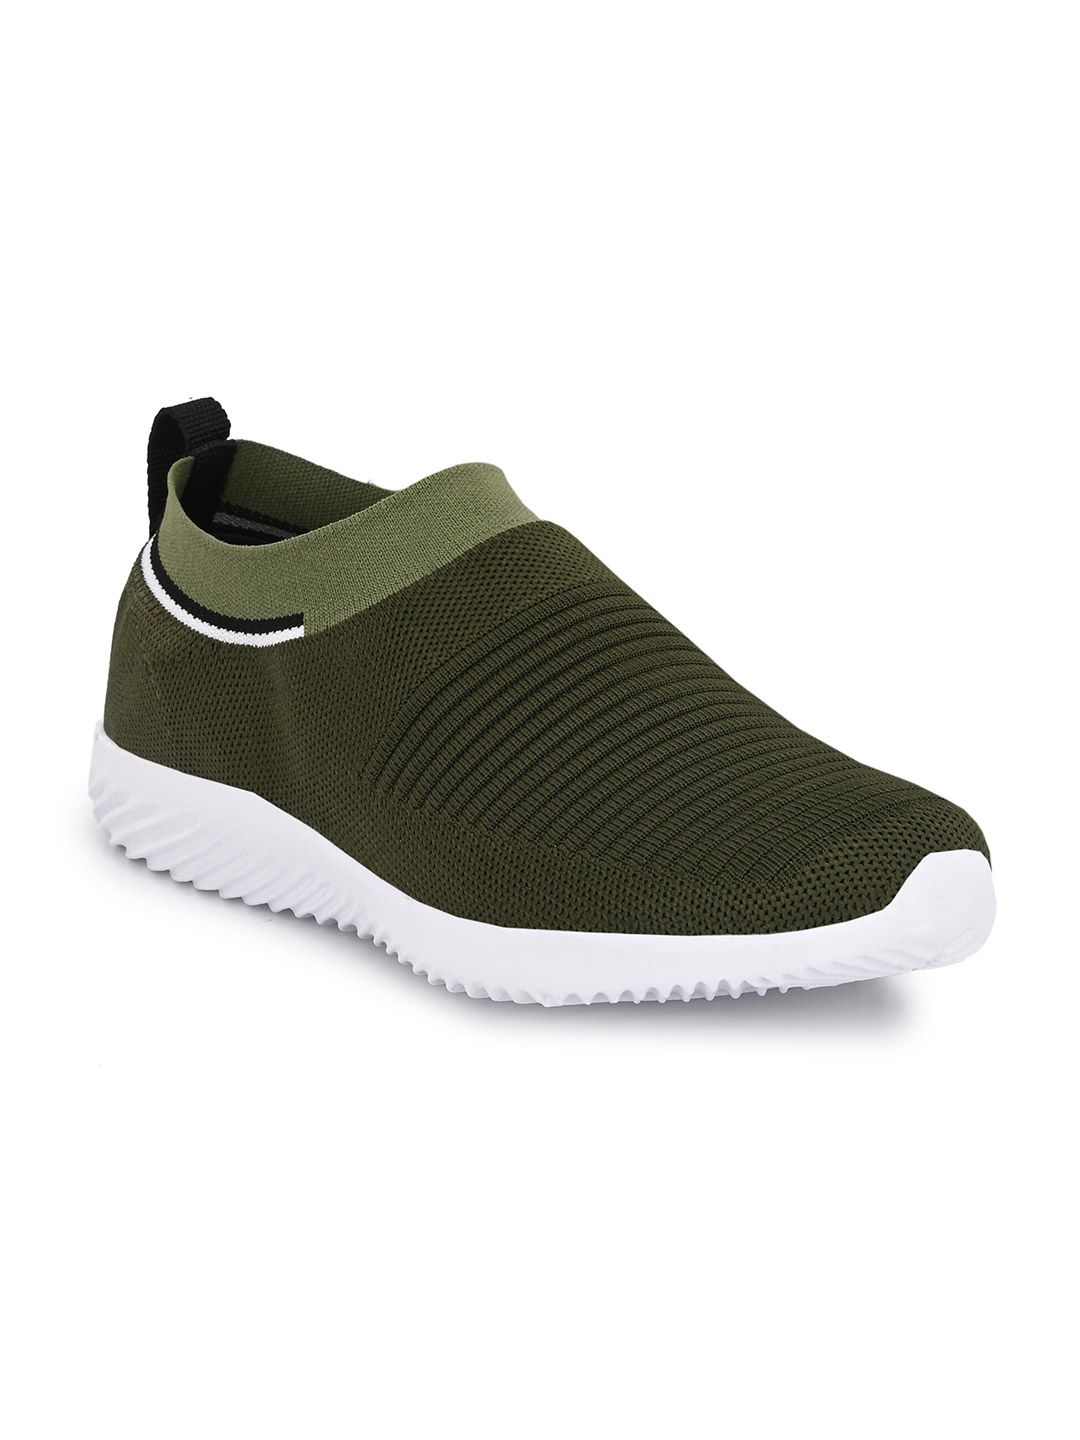 OFF LIMITS Women Olive Green Mesh Walking Non-Marking Shoes Price in India